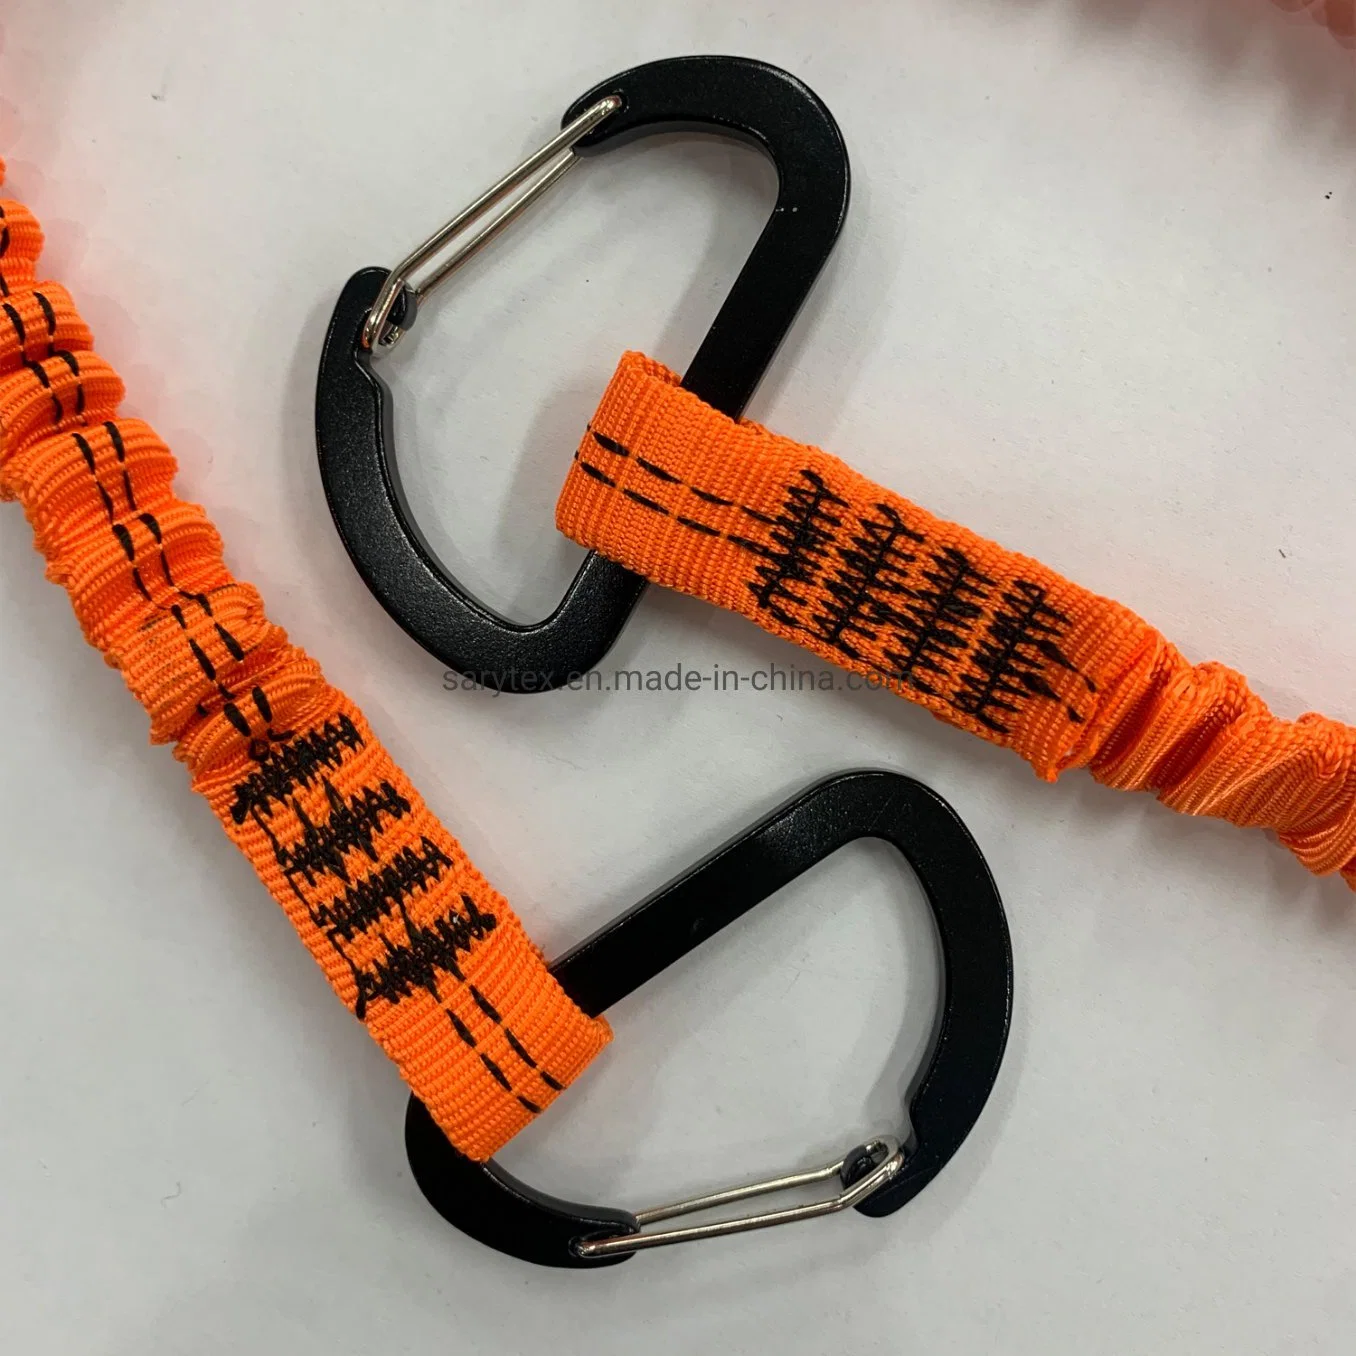 Double Stainless Steel Hook Elastic Anti-Fall Safety Rope